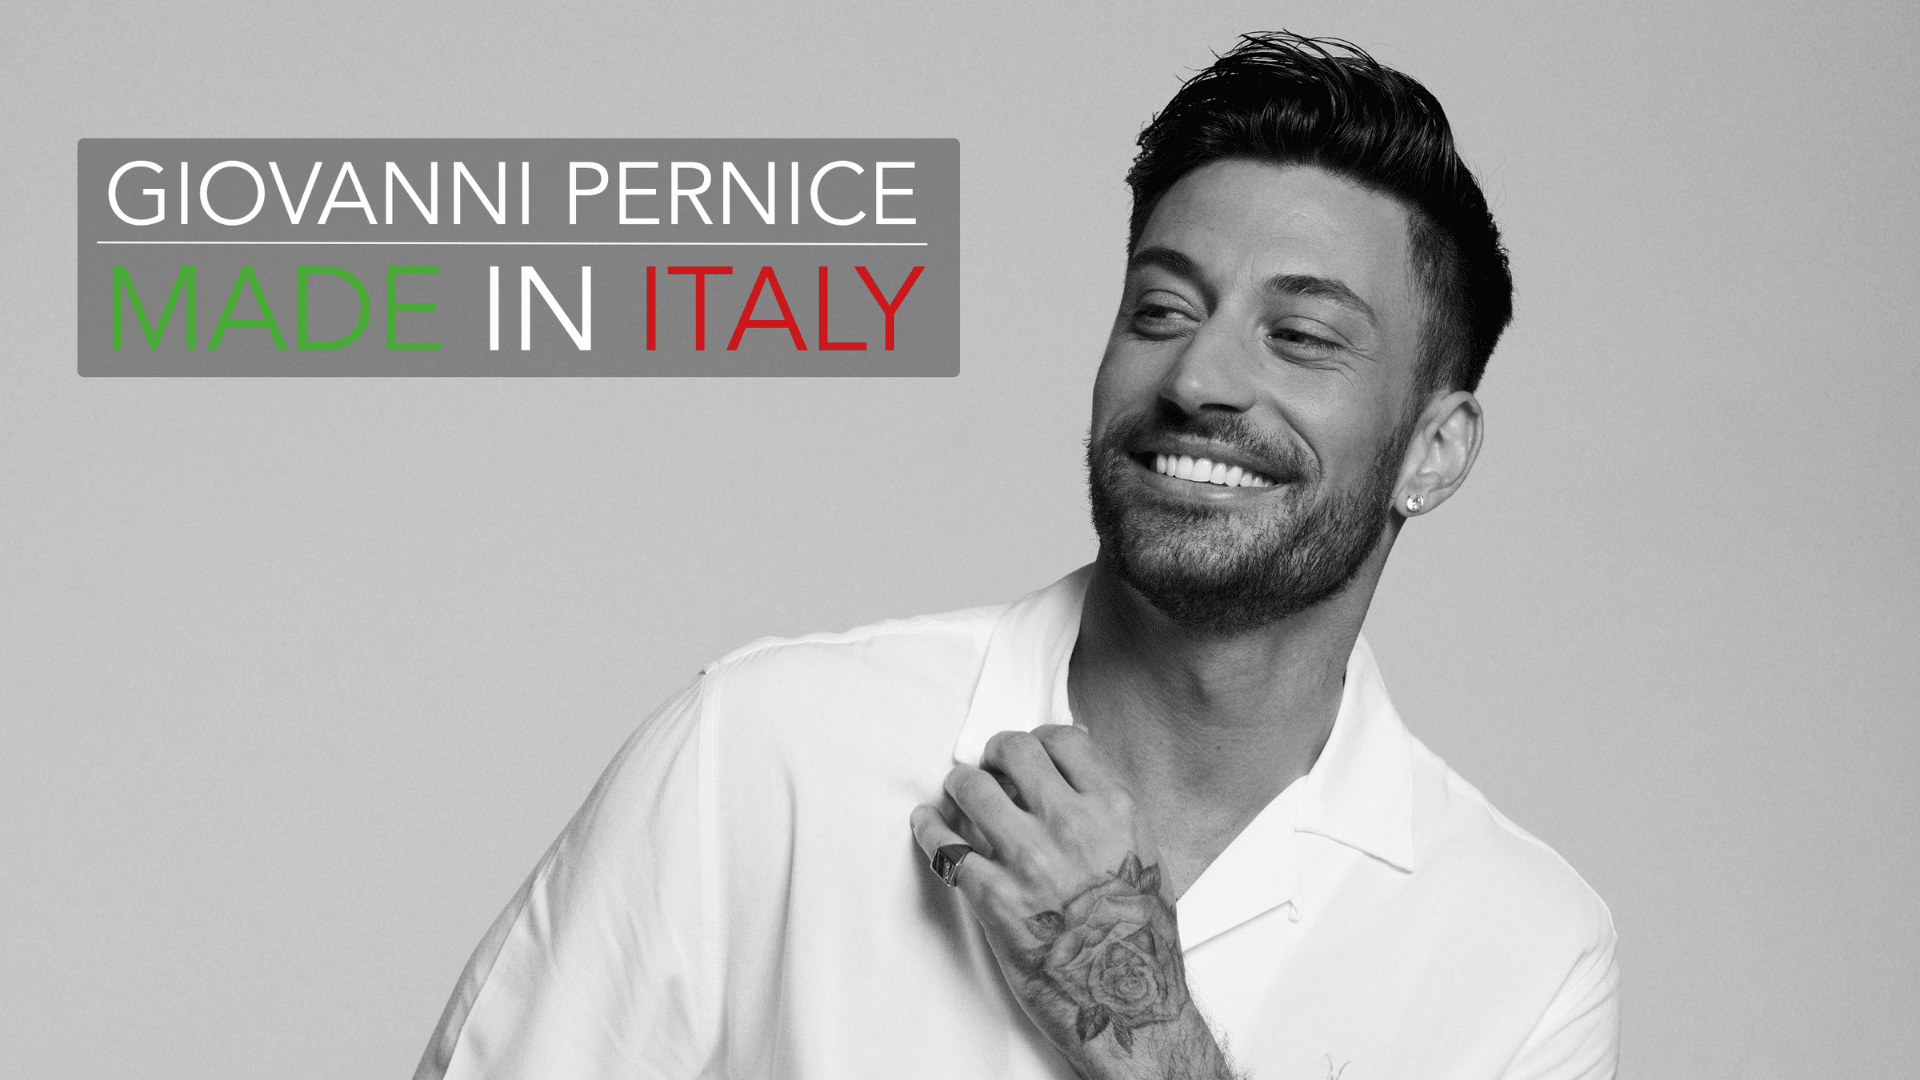 GIOVANNI PERNICE MADE IN ITALY black and white image of Giovanni smiling broadly.He's wearing a white t-shirt